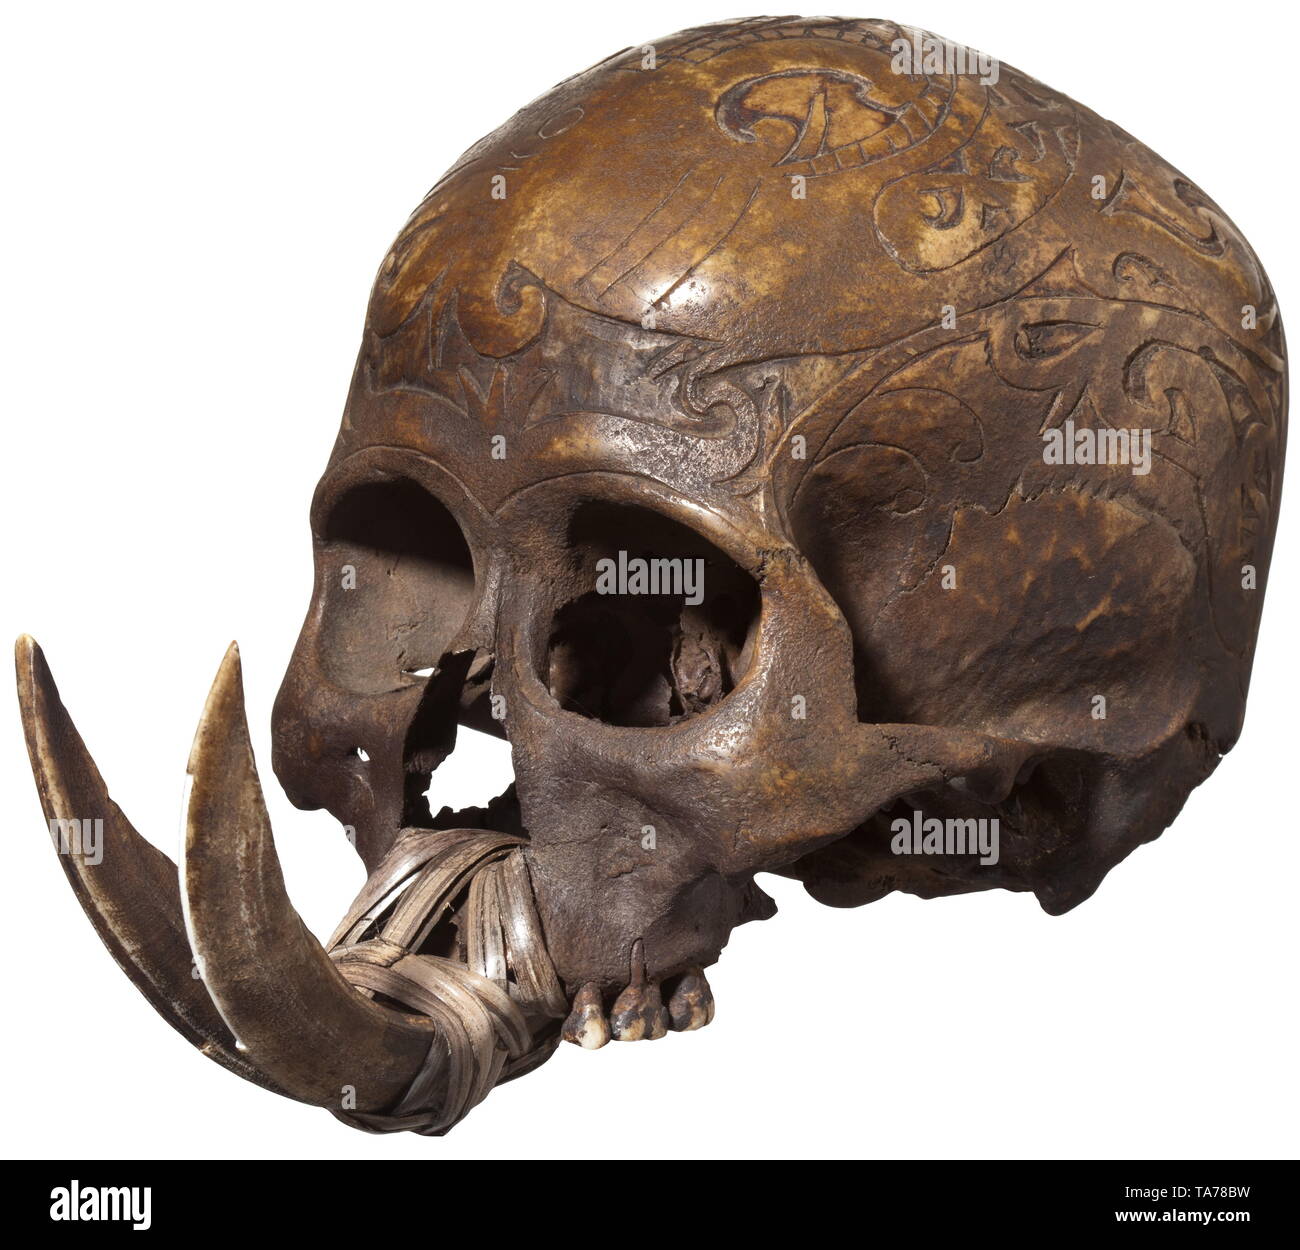 A Dayak trophy skull, Borneo Elaborately carved skull, the entire skullcap profusely decorated with ornaments, teeth of the upper jaw partially preserved and the front teeth replaced by boar tusks. Dark brown patina, eye sockets and temporal bones with signs of age, forehead slightly polished by use. Height 16 cm. historic, historical, Indonesian archipelago, Indonesia, Far East, Asia, Asian, ethnology, ethnicity, ethnic, tribal, object, objects, stills, clipping, clippings, cut out, cut-out, cut-outs, Additional-Rights-Clearance-Info-Not-Available Stock Photo